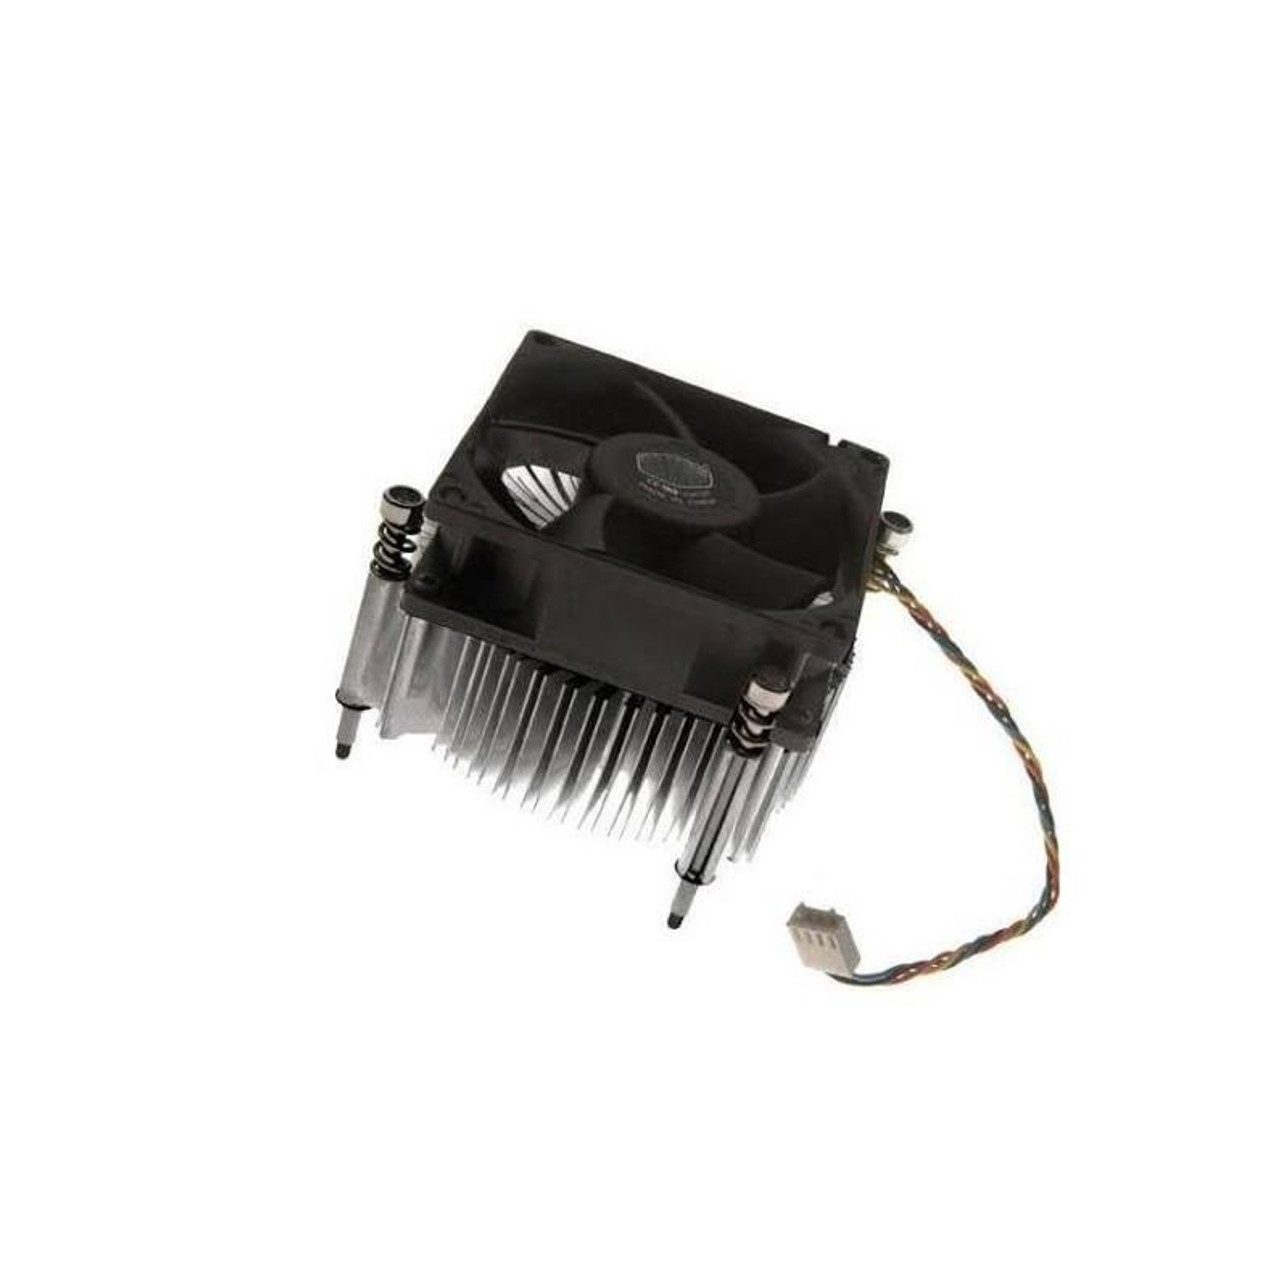 667727-001 HP CPU Cooling Fan And Heatsink for 280 G1